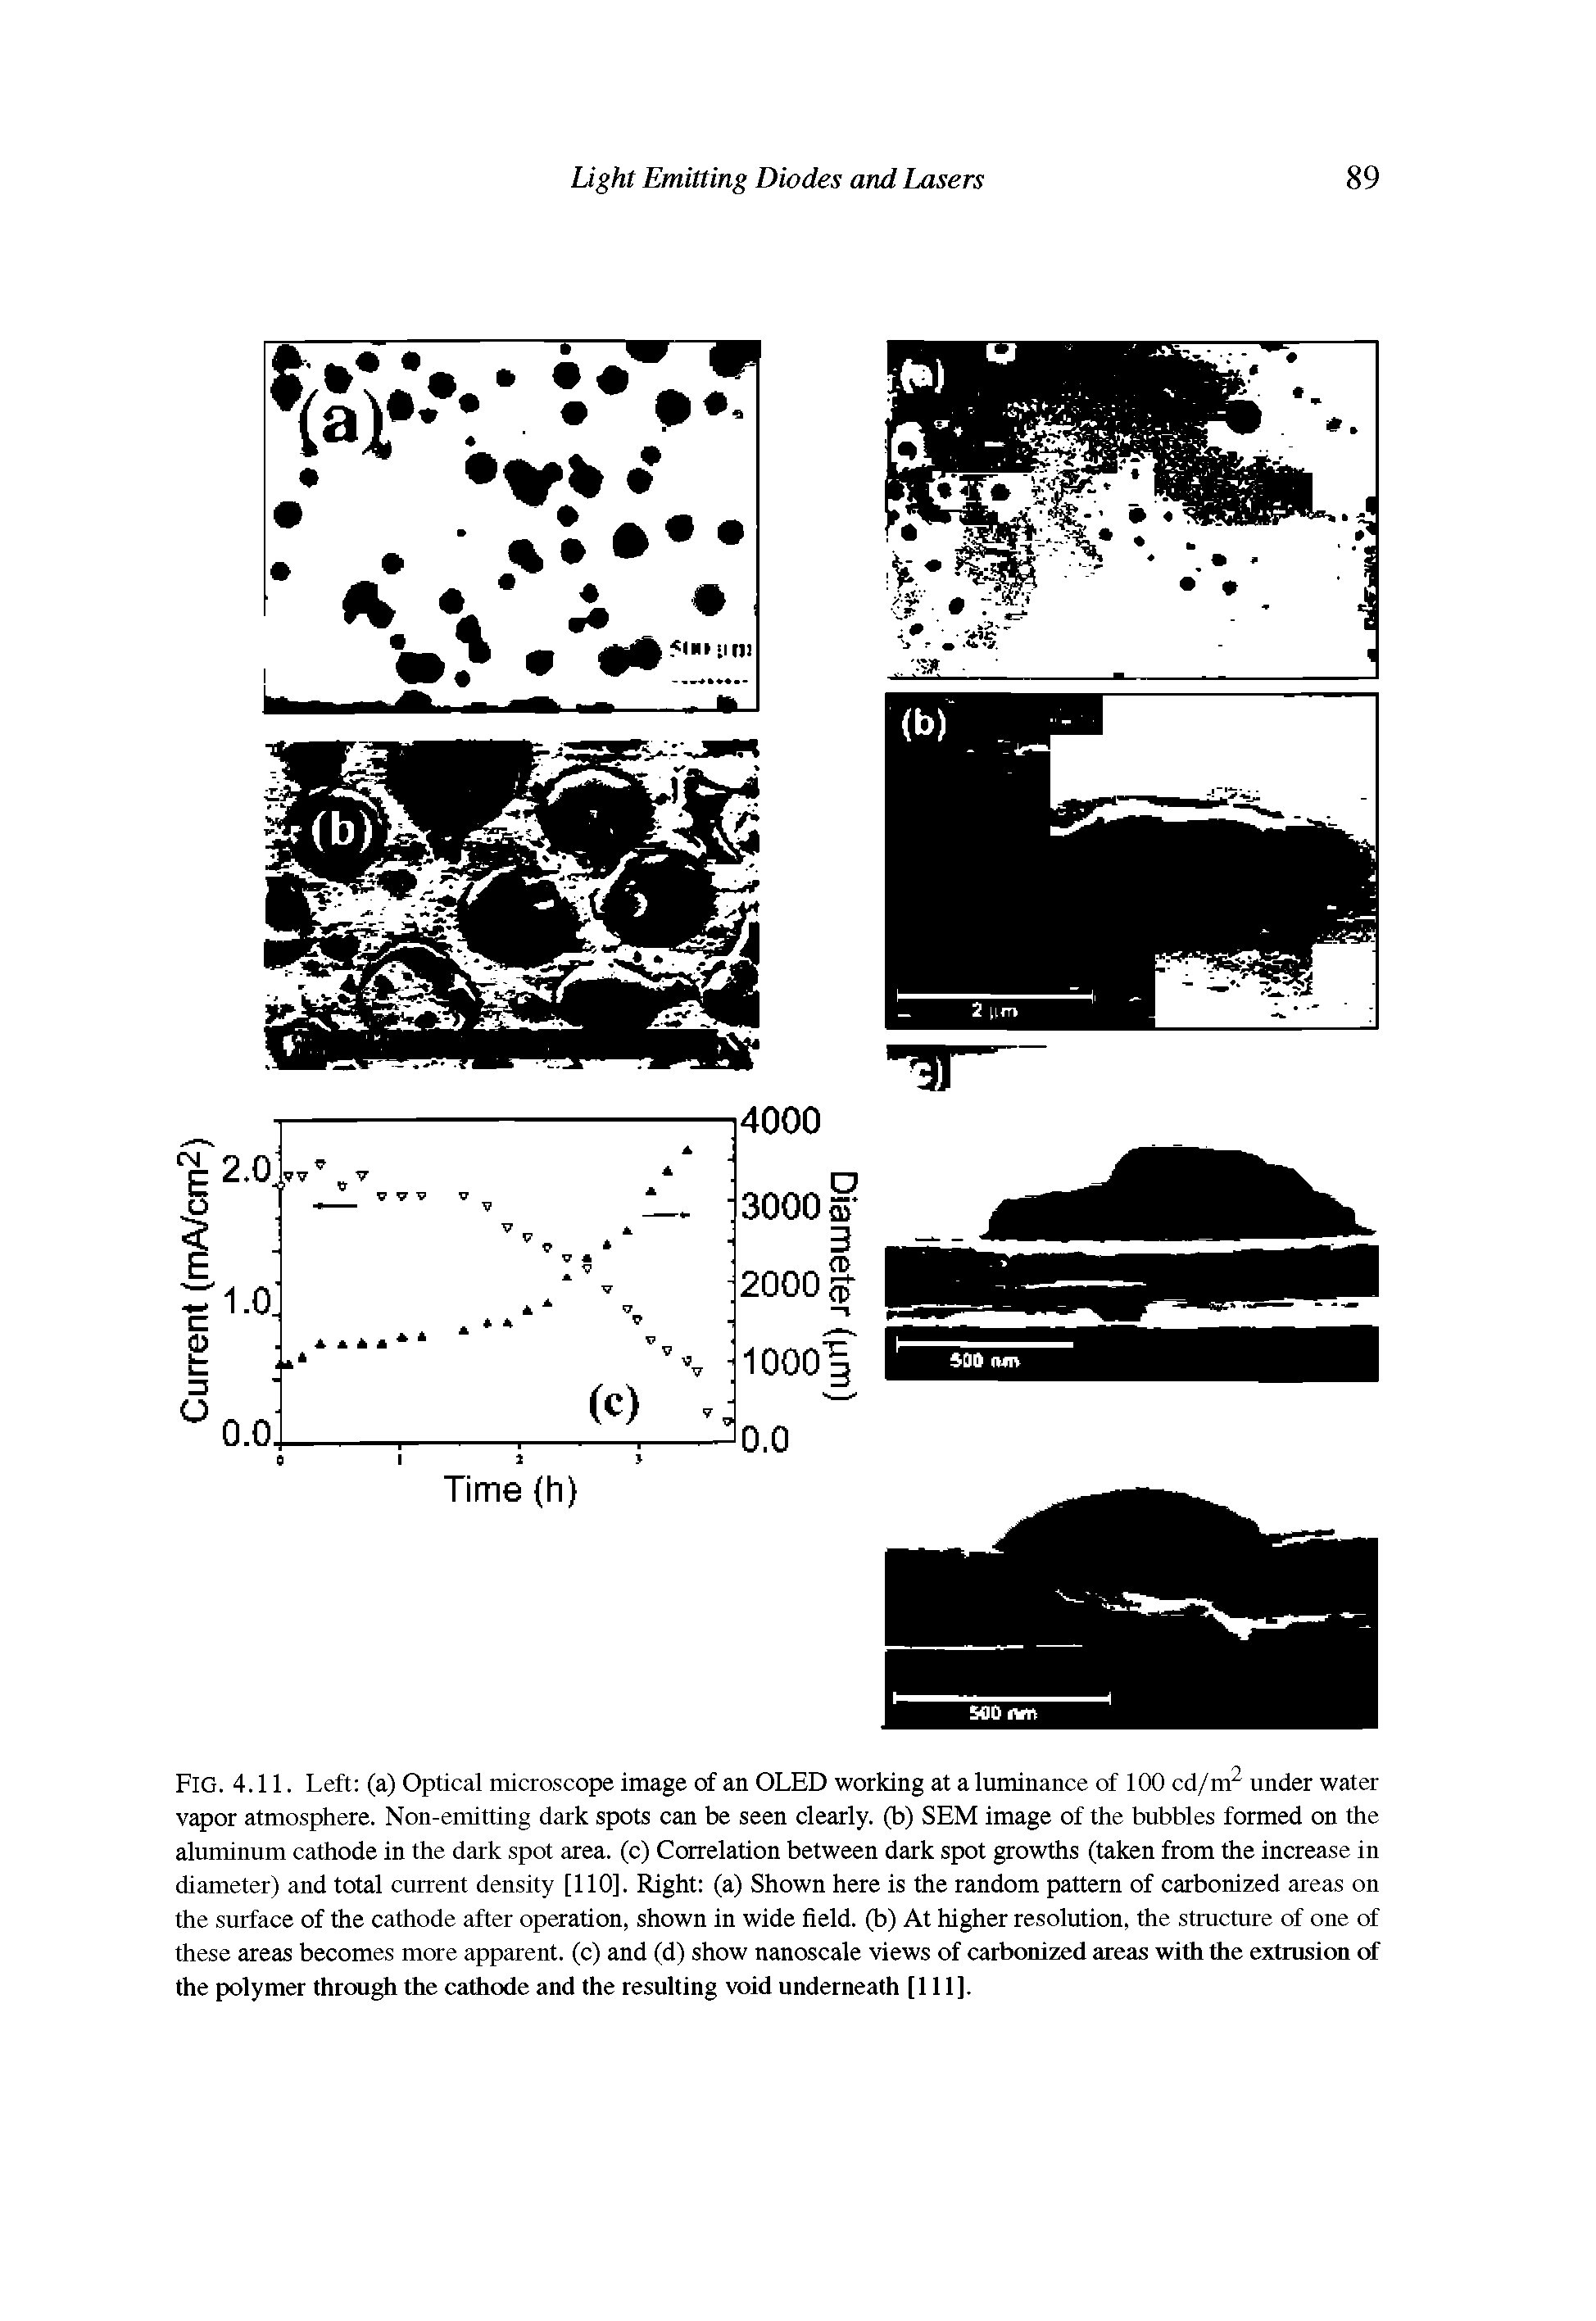 Fig. 4.11. Left (a) Optical microscope image of an OLED working at a luminance of 100 cd/m2 under water vapor atmosphere. Non-emitting dark spots can be seen clearly, (b) SEM image of the bubbles formed on the aluminum cathode in the dark spot area, (c) Correlation between dark spot growths (taken from the increase in diameter) and total current density [110]. Right (a) Shown here is the random pattern of carbonized areas on the surface of the cathode after operation, shown in wide field, (b) At higher resolution, the structure of one of these areas becomes more apparent, (c) and (d) show nanoscale views of carbonized areas with the extrusion of the polymer through the cathode and the resulting void underneath [111].